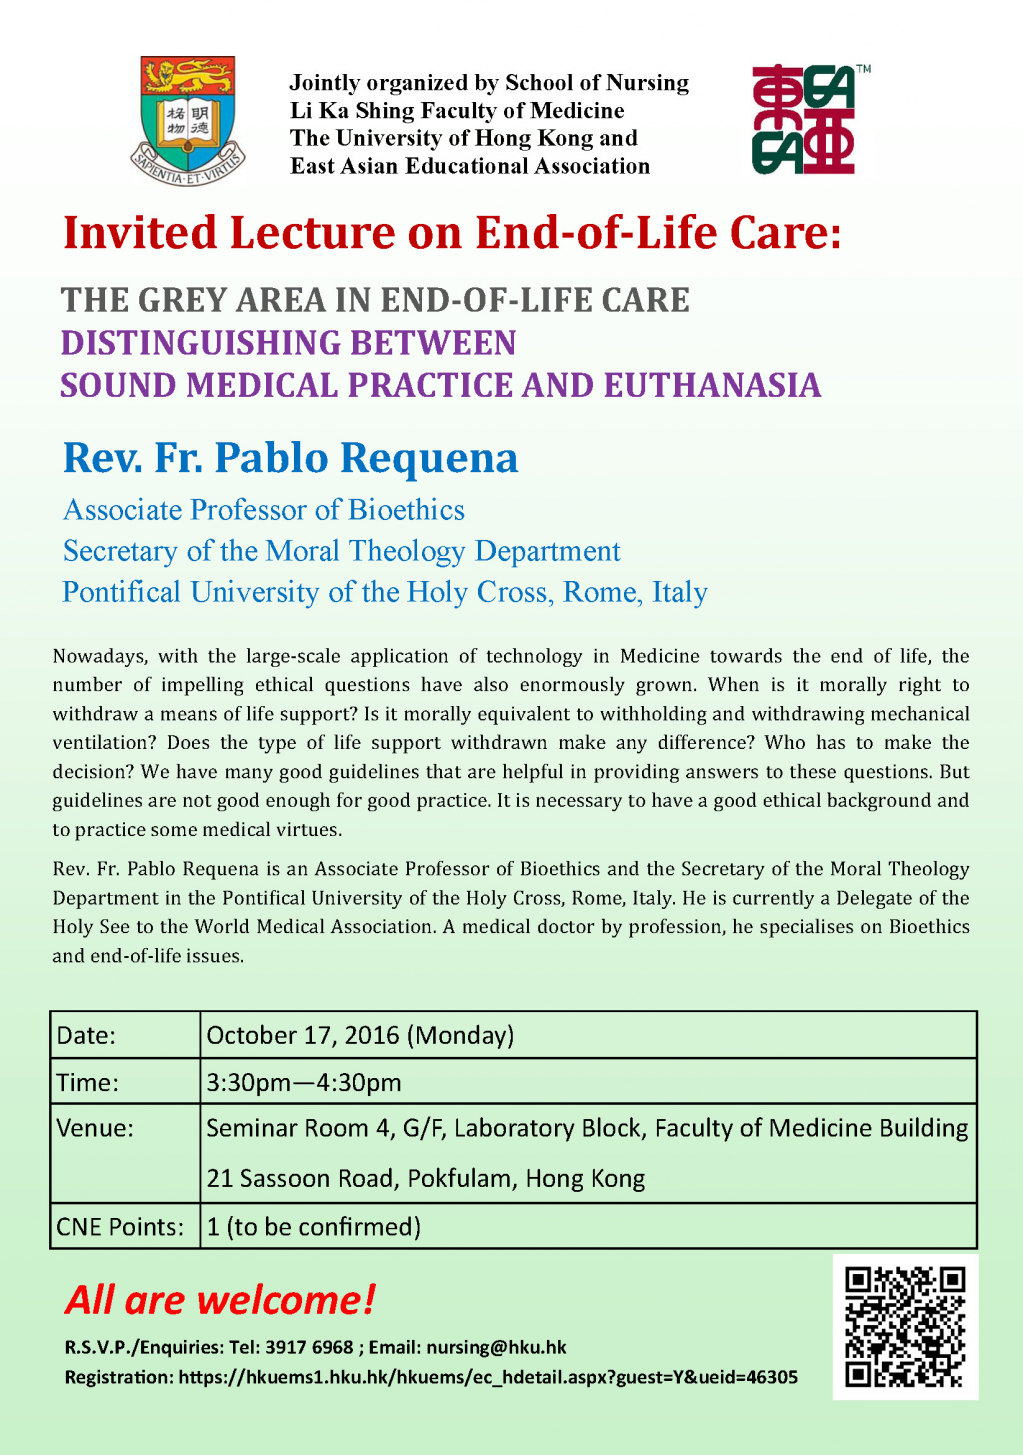 Invited Lecture on End-of-Life Care: The Grey Area In End-Of-Life Care-Distinguishing Between Sound Medical Practice And Euthanasia